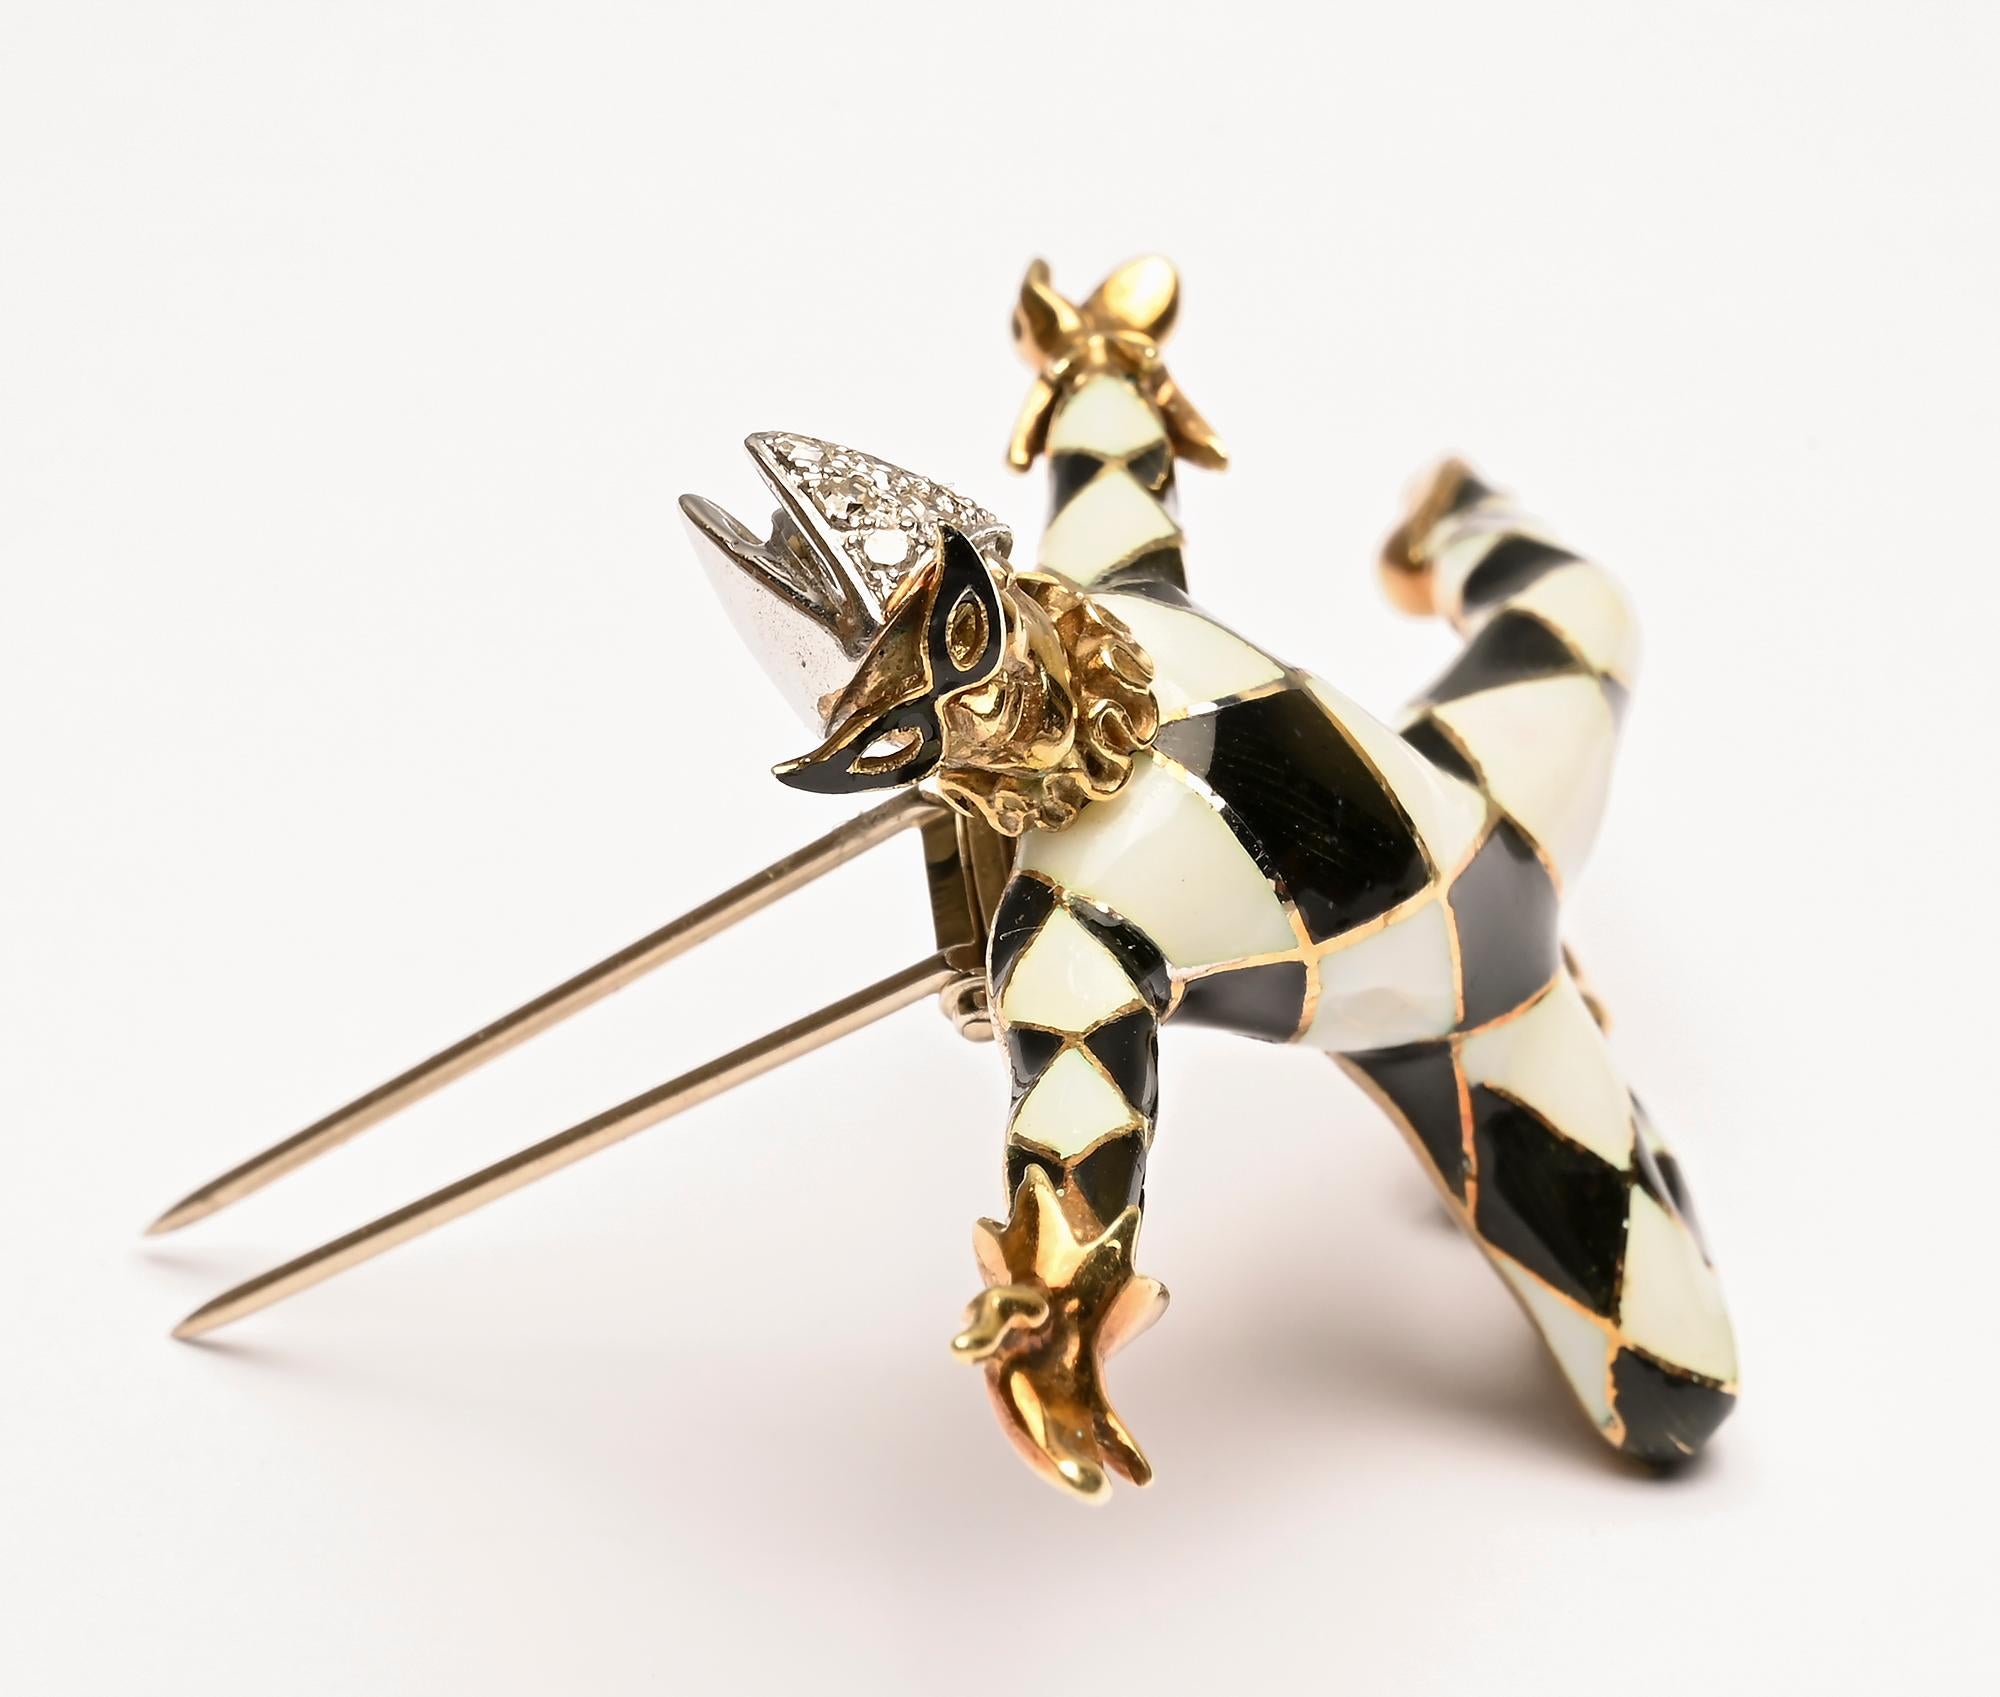 Finely detailed gold jester brooch in which he leaps through the air. The jester is dressed in black and white harlequin clothing with a diamond cap. A ruffled collar and enamel glasses add to the graceful demeanor of this charming acrobat.
He